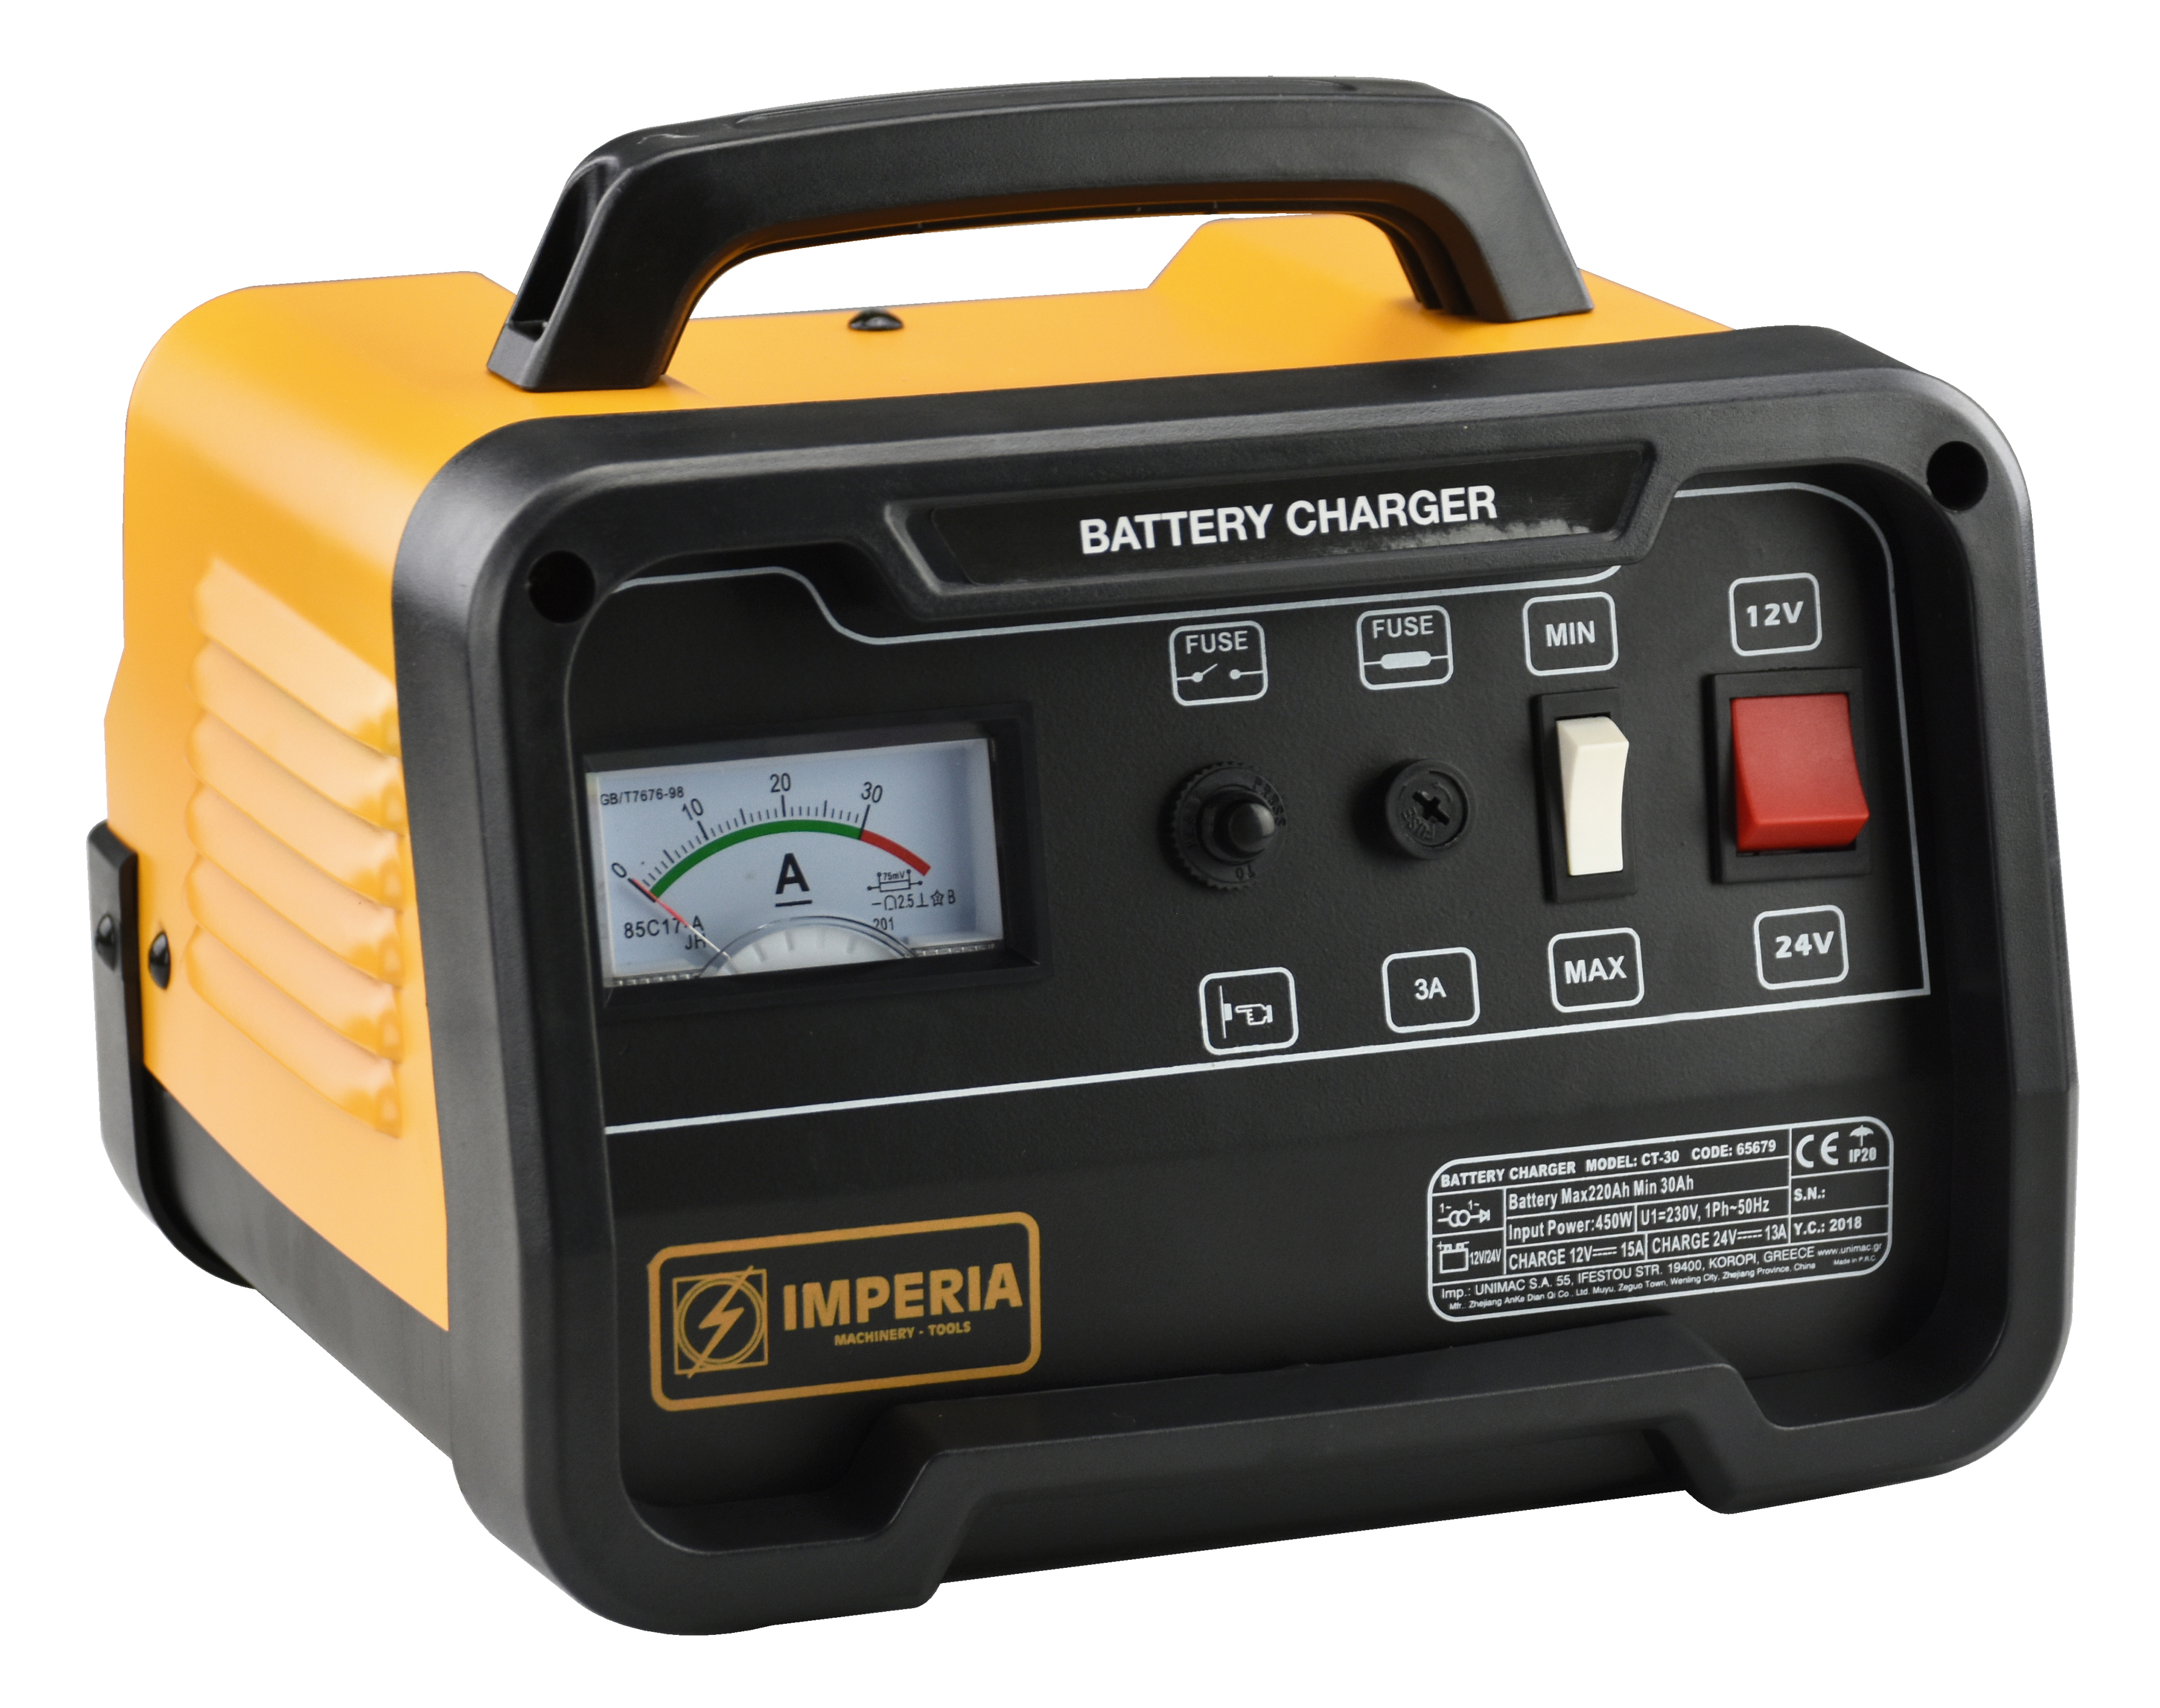 Battery Charger CT-30 Imperia